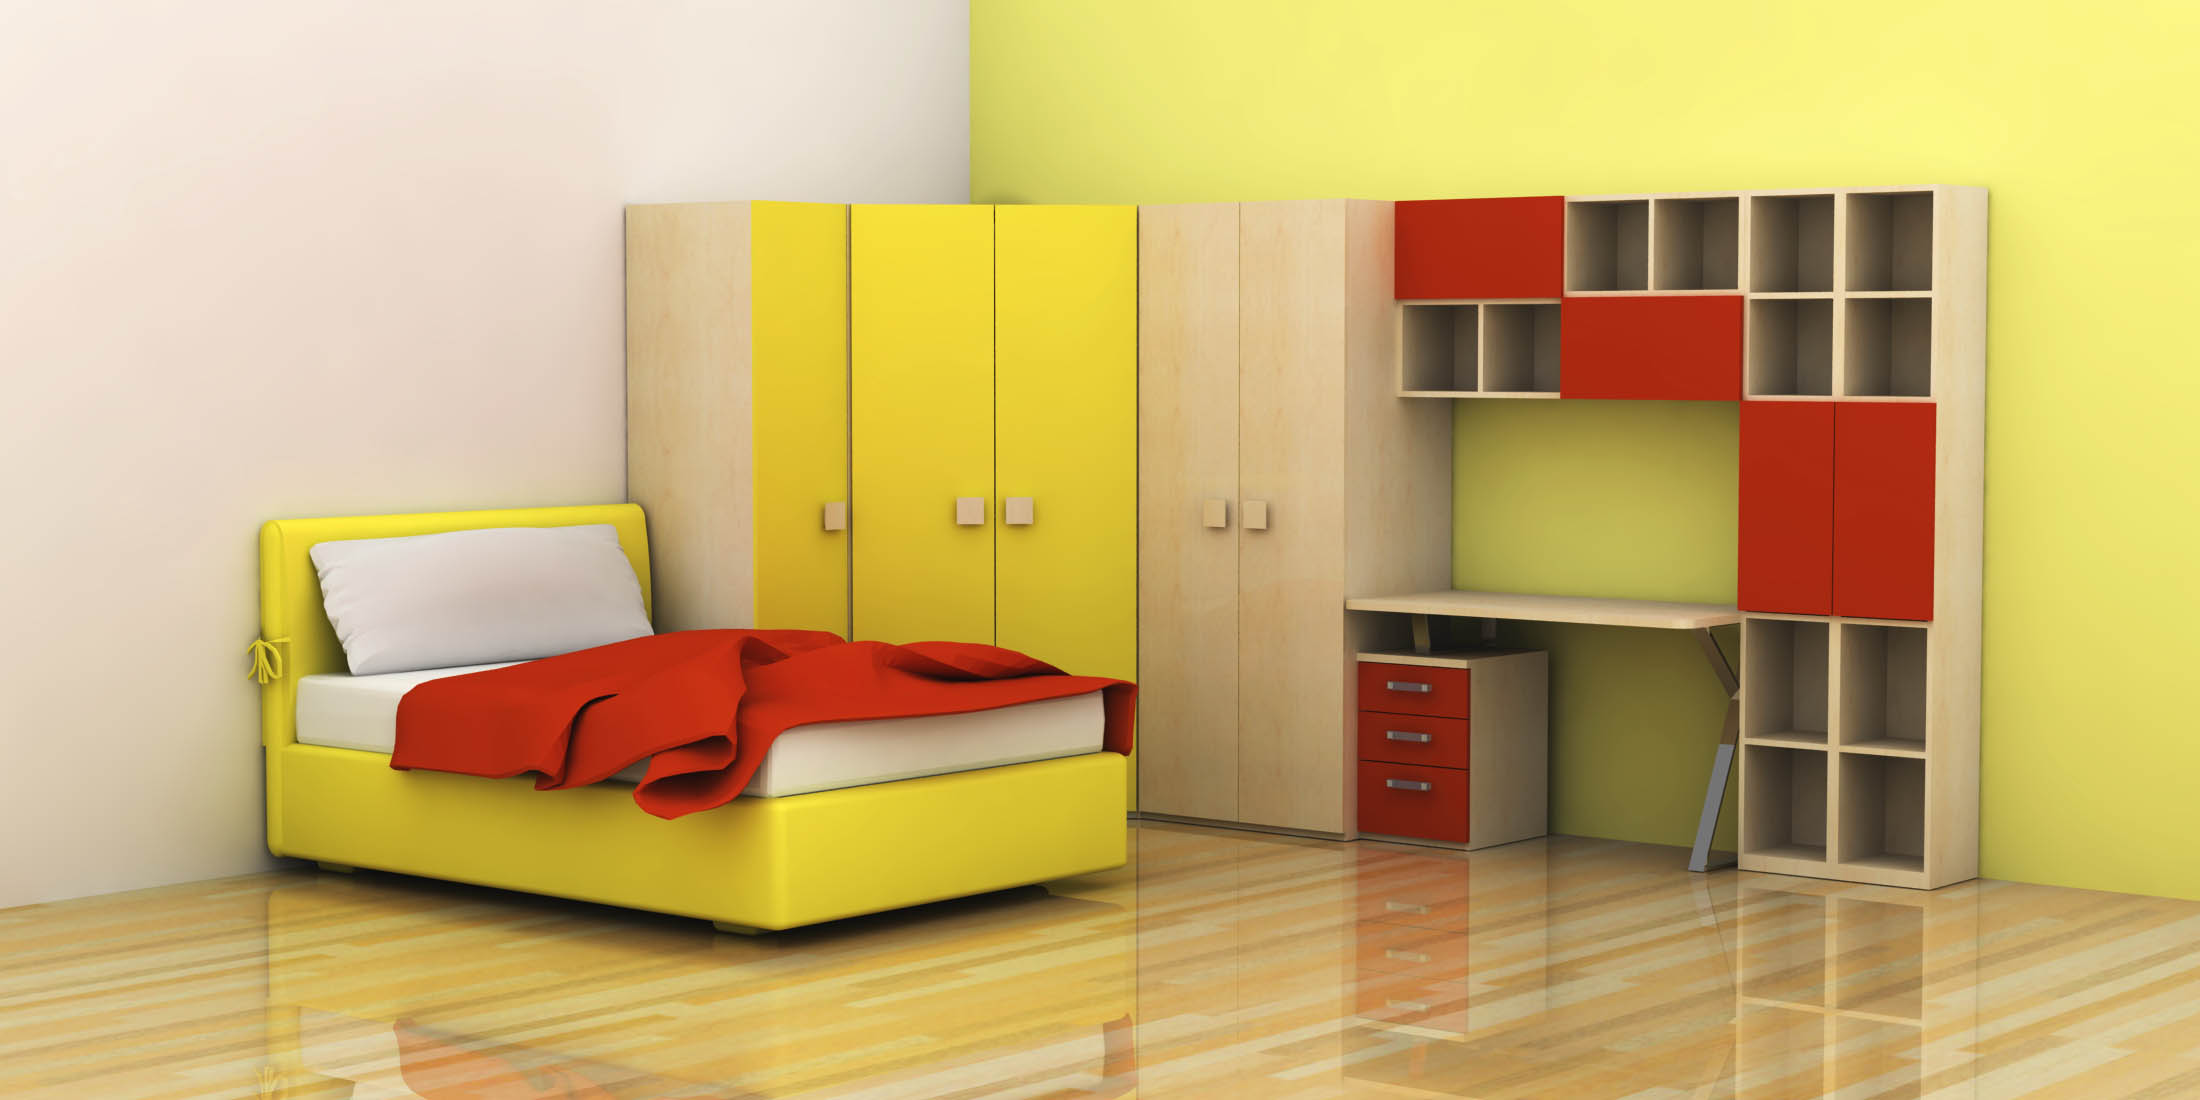 kids room cheerful bedroom inspire your eternal yellow furniture parquet flooring natural wood tile desk with bookcase shelves wooden cupboard divan frames white mattress long